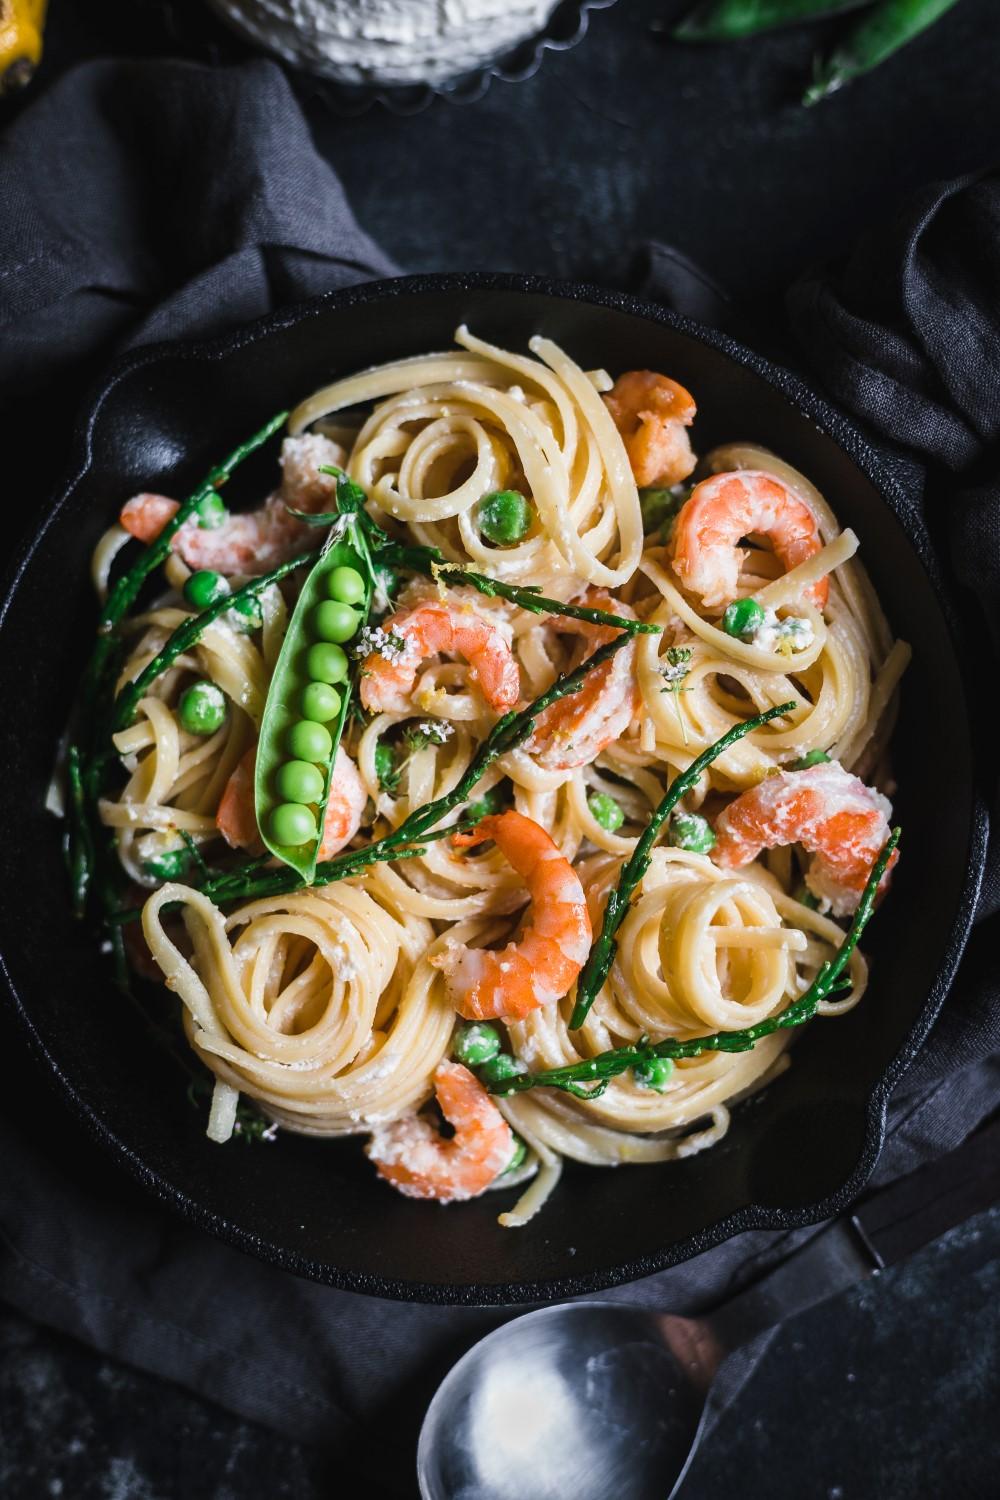 This quick and rich garlic ricotta shrimp pasta is incredibly creamy and luxurious and has a lovely sour and salty flavor from lemon and glasswort (sea asparagus).